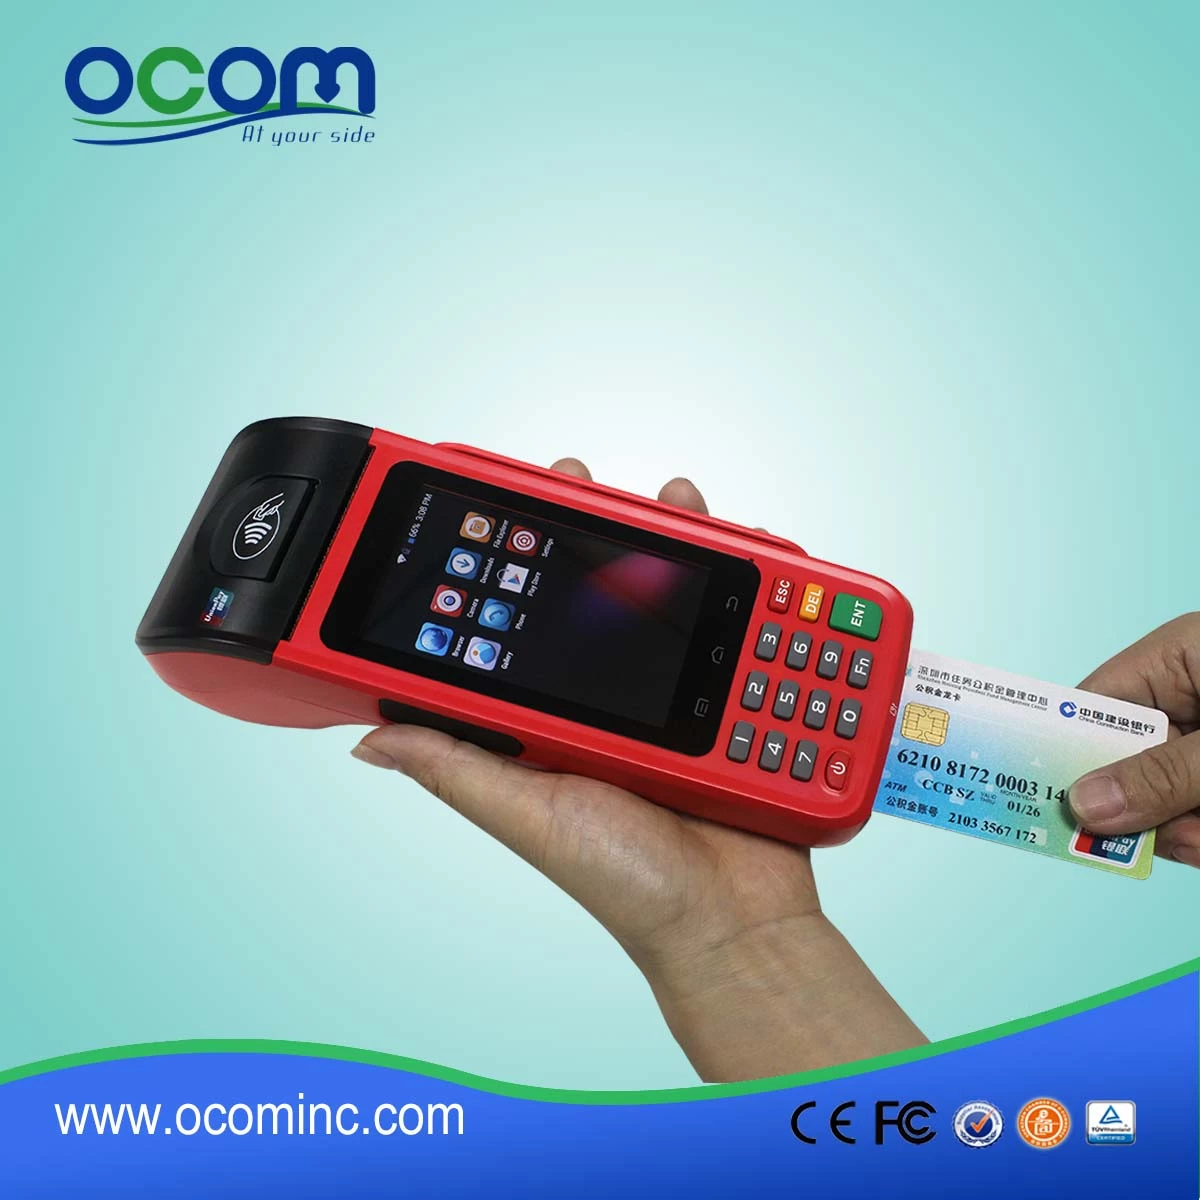 P8000S android mobile handheld pos contactless smart card reader